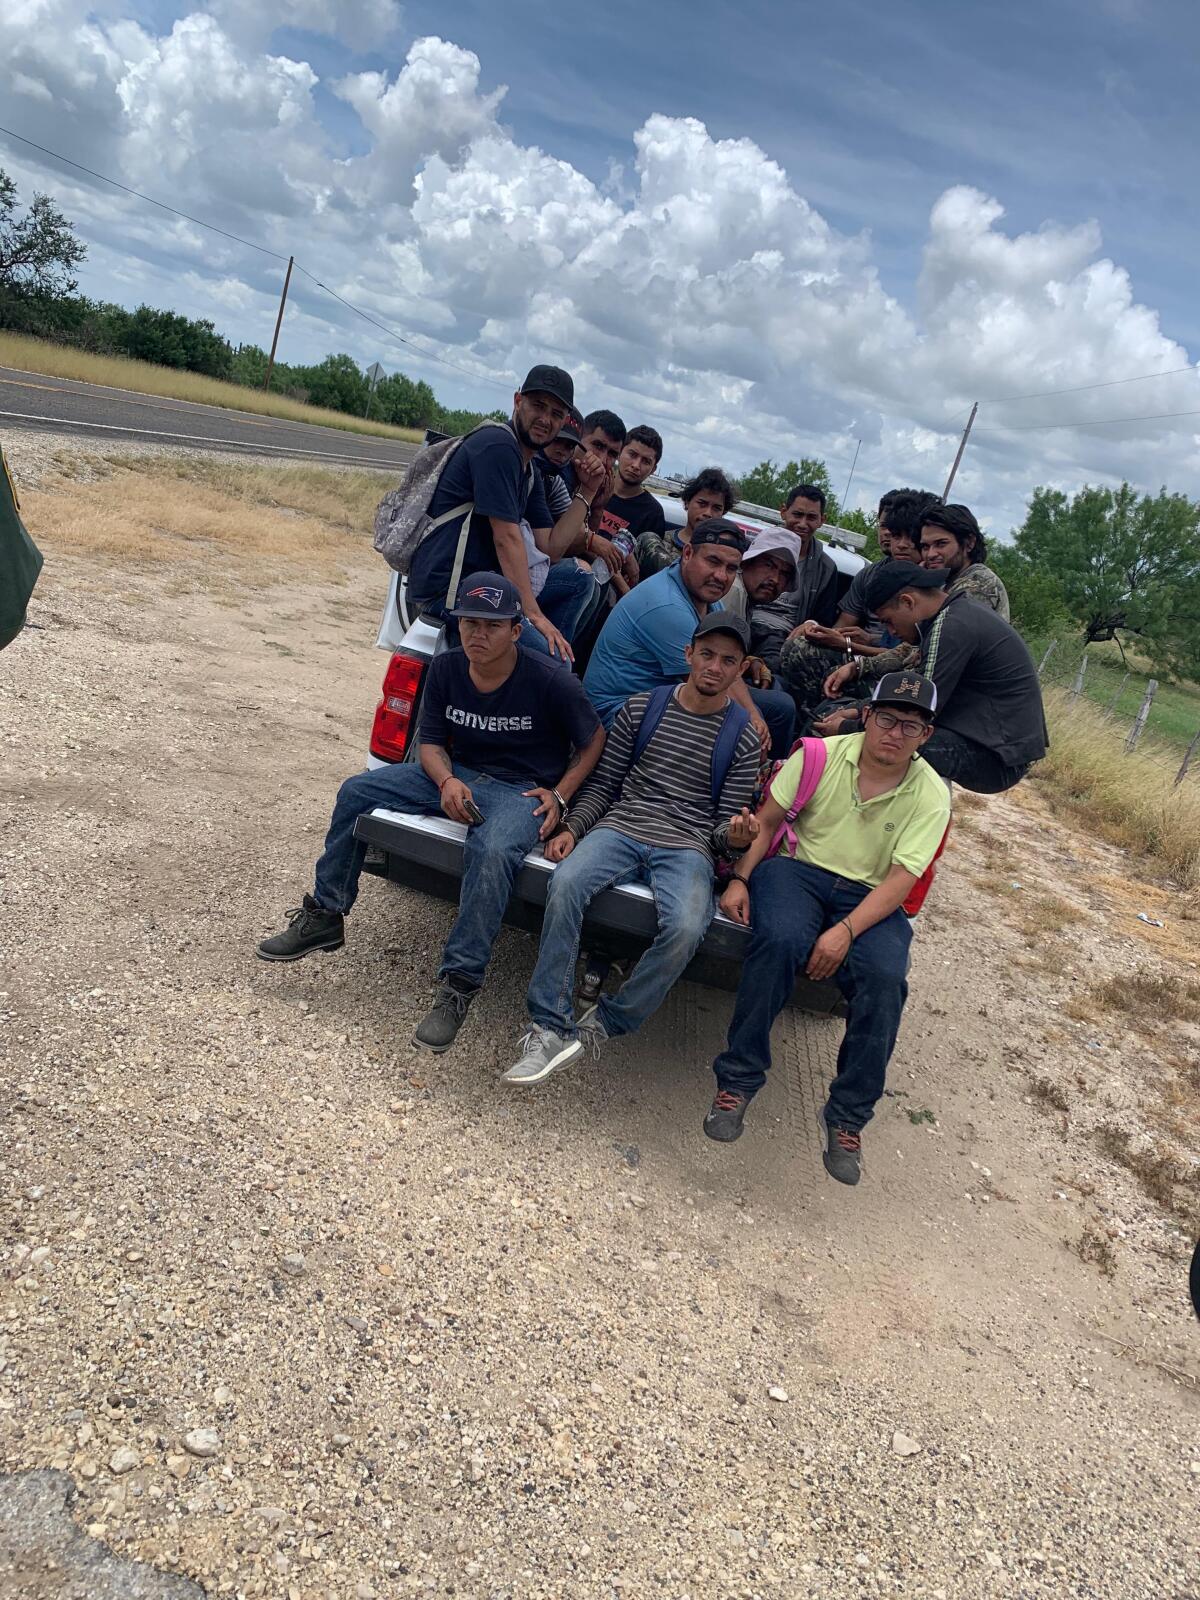 Migrants recently caught near John Sewell's hunting ranch outside Uvalde, Texas.